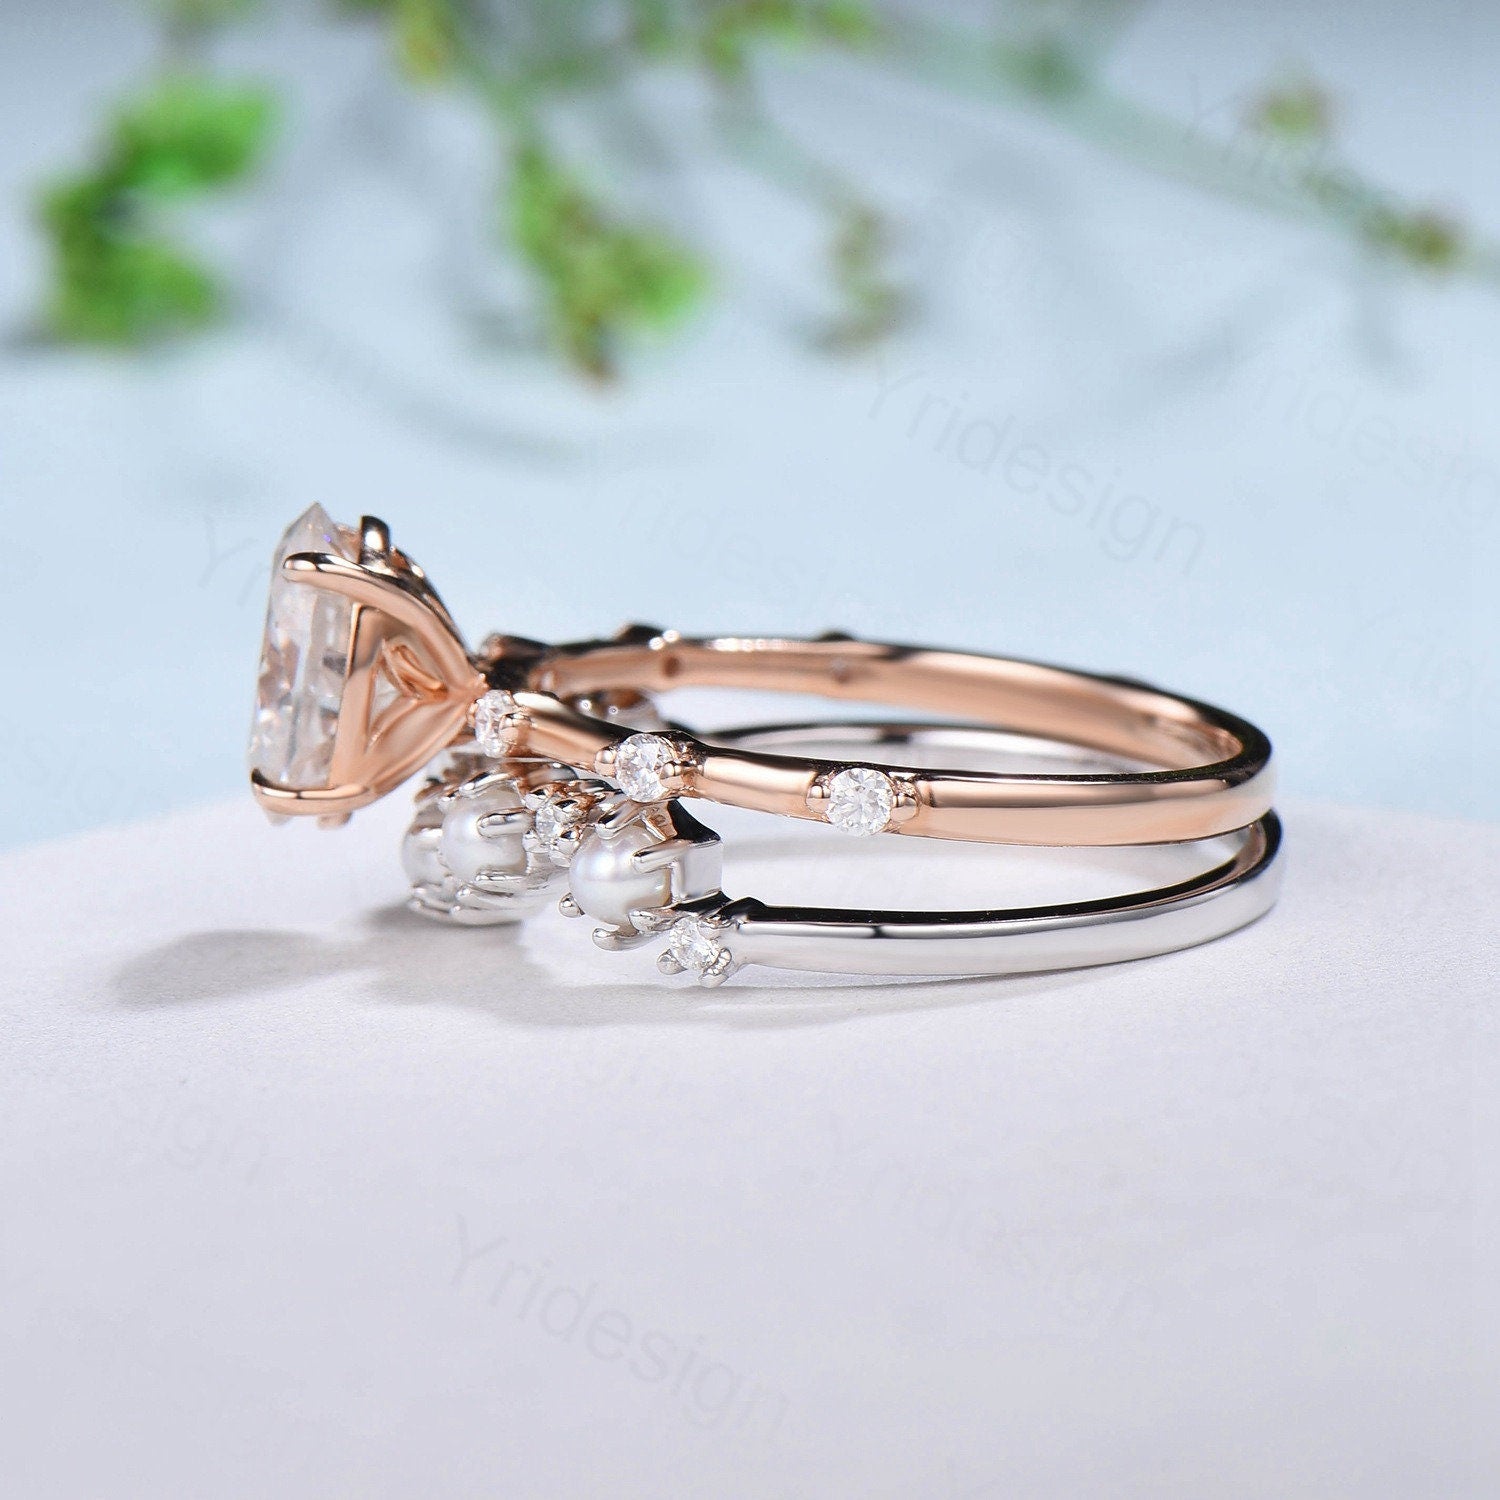 Unique 3 Stone Minimalist 0.55 Carat Round Cut Morganite Engagement Ring,  Trilogy Ring, Wedding Ring in 10k Solid Rose Gold, Gift For Her, Gift For  Woman, Promise Ring - Walmart.com